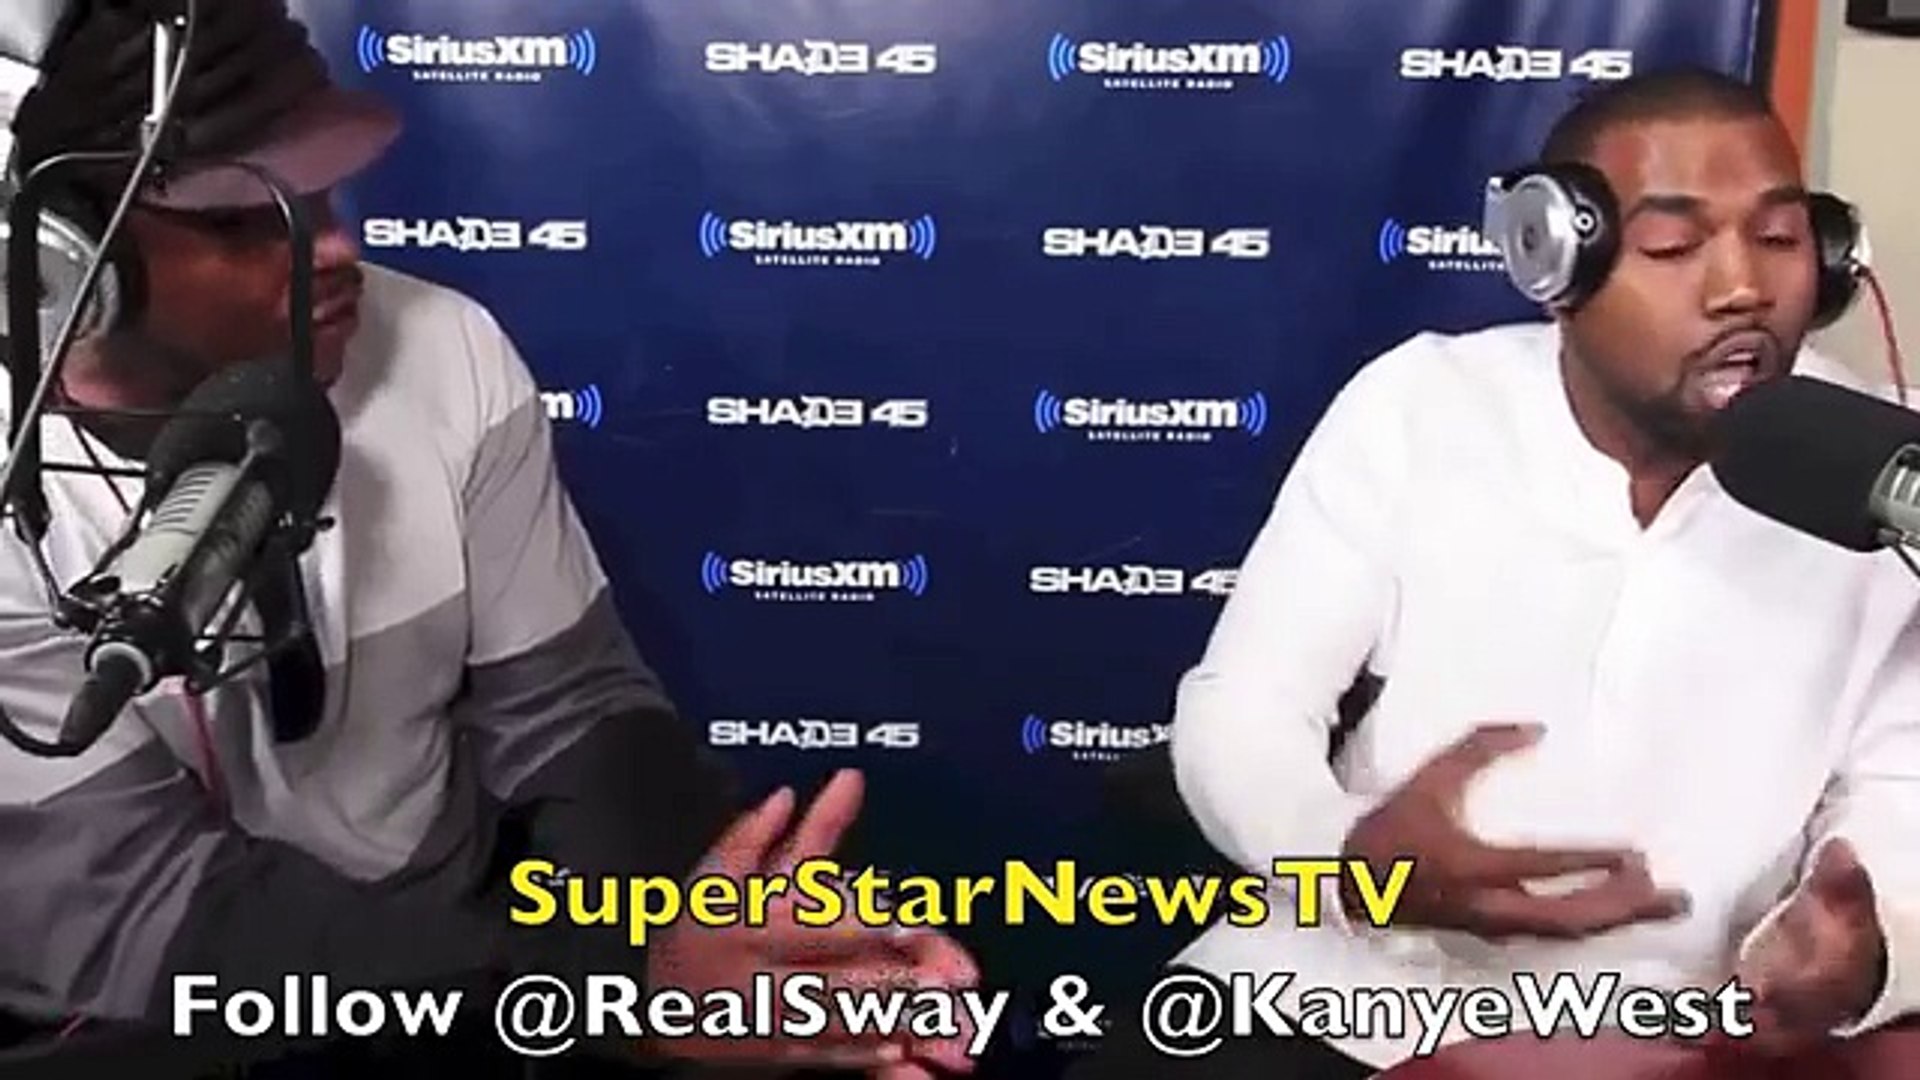 Kanye West almost gets into a Fight with Sway - Full Video - video  Dailymotion